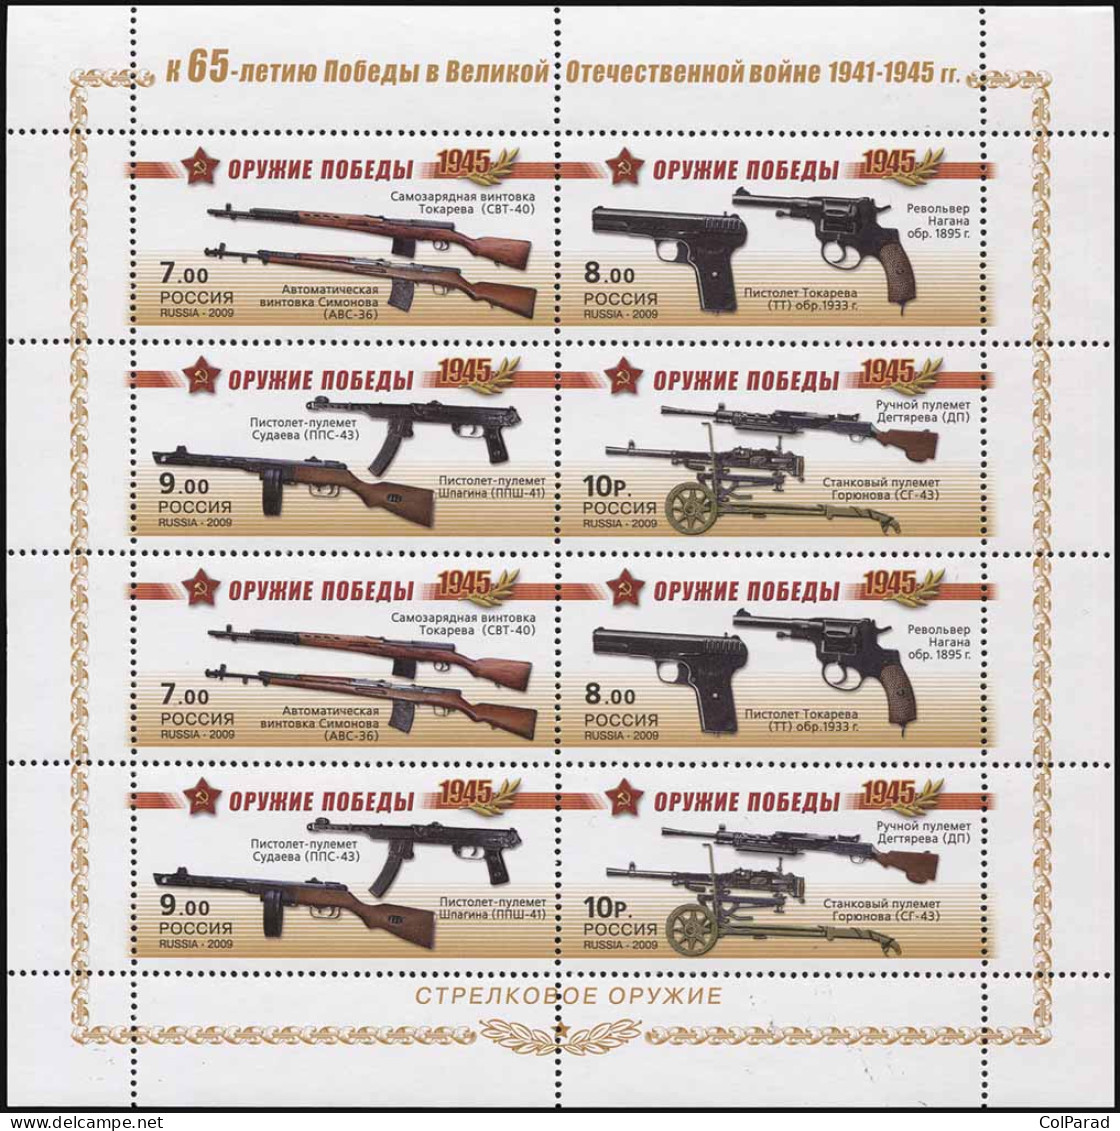 RUSSIA - 2009 - MINIATURE SHEET MNH ** - Victory Weapons. Small Arms - Unused Stamps